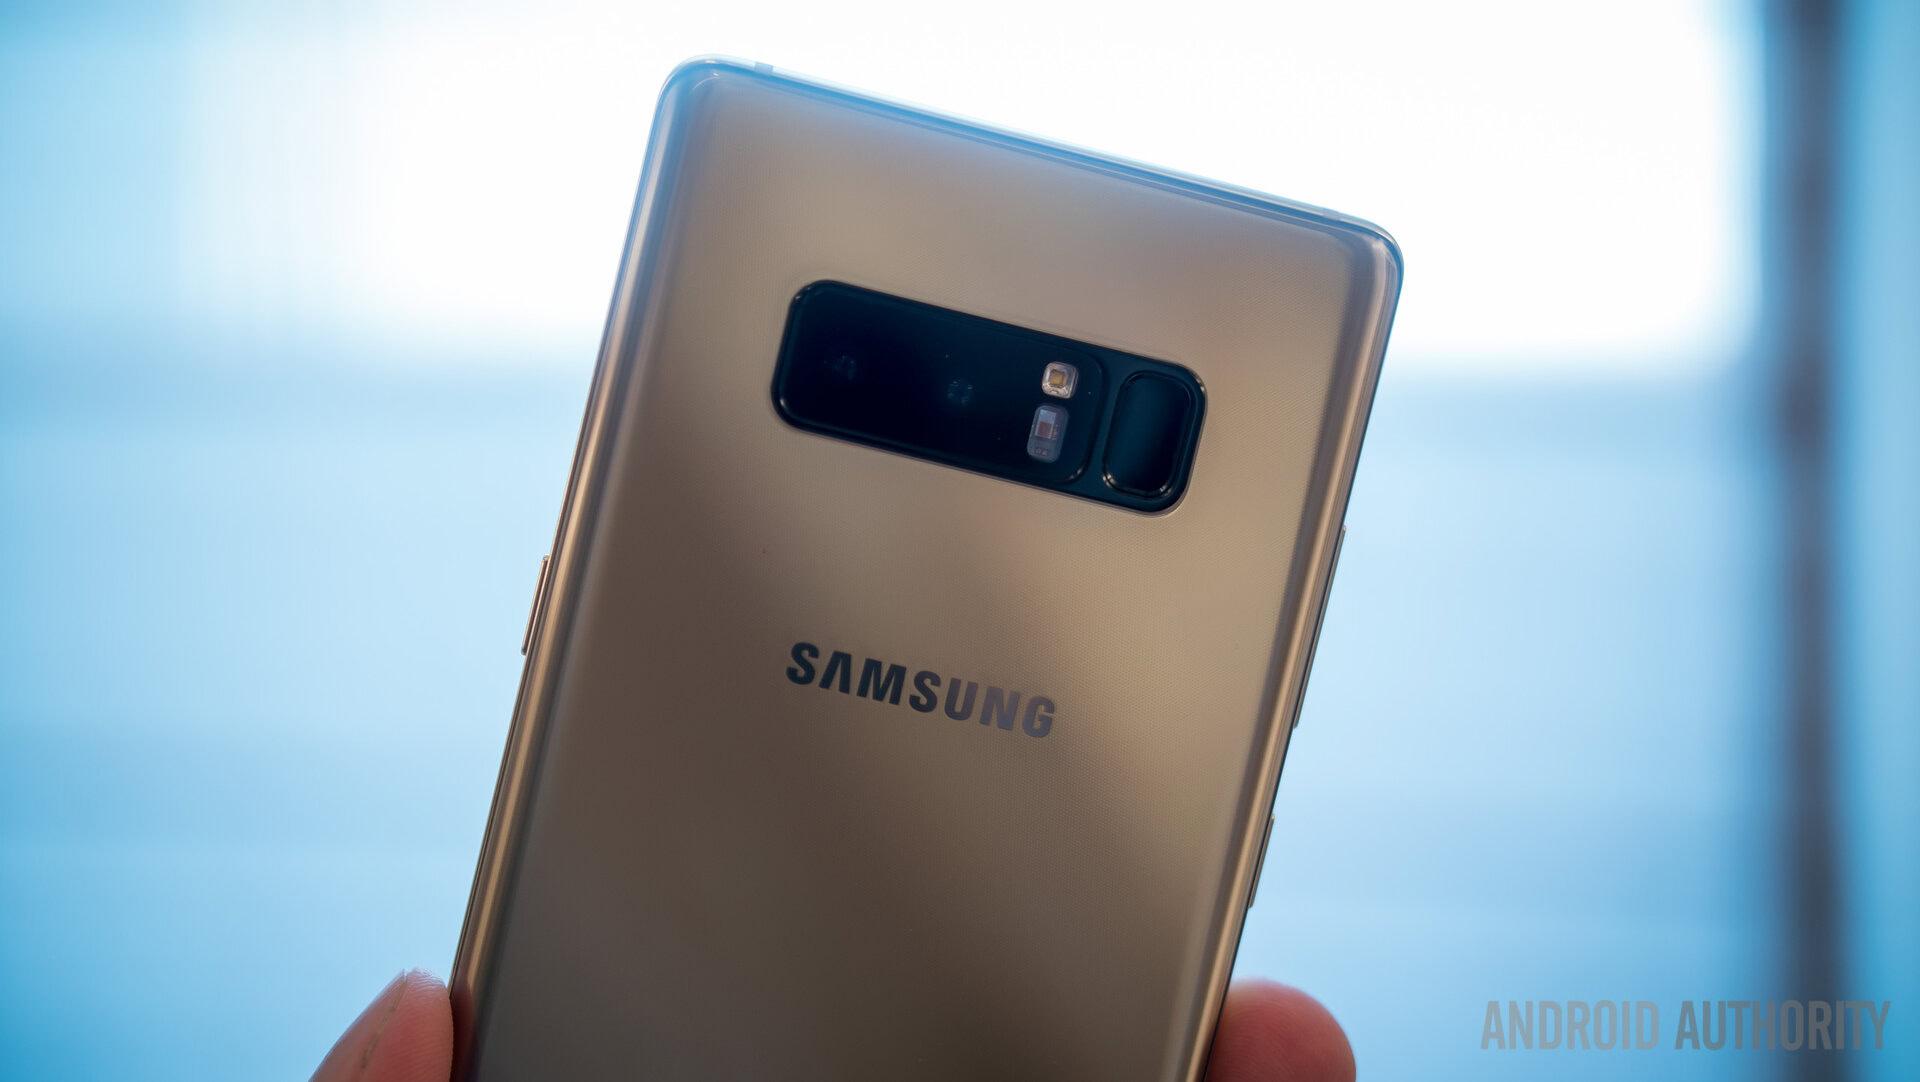 Samsung Galaxy Note 8 features